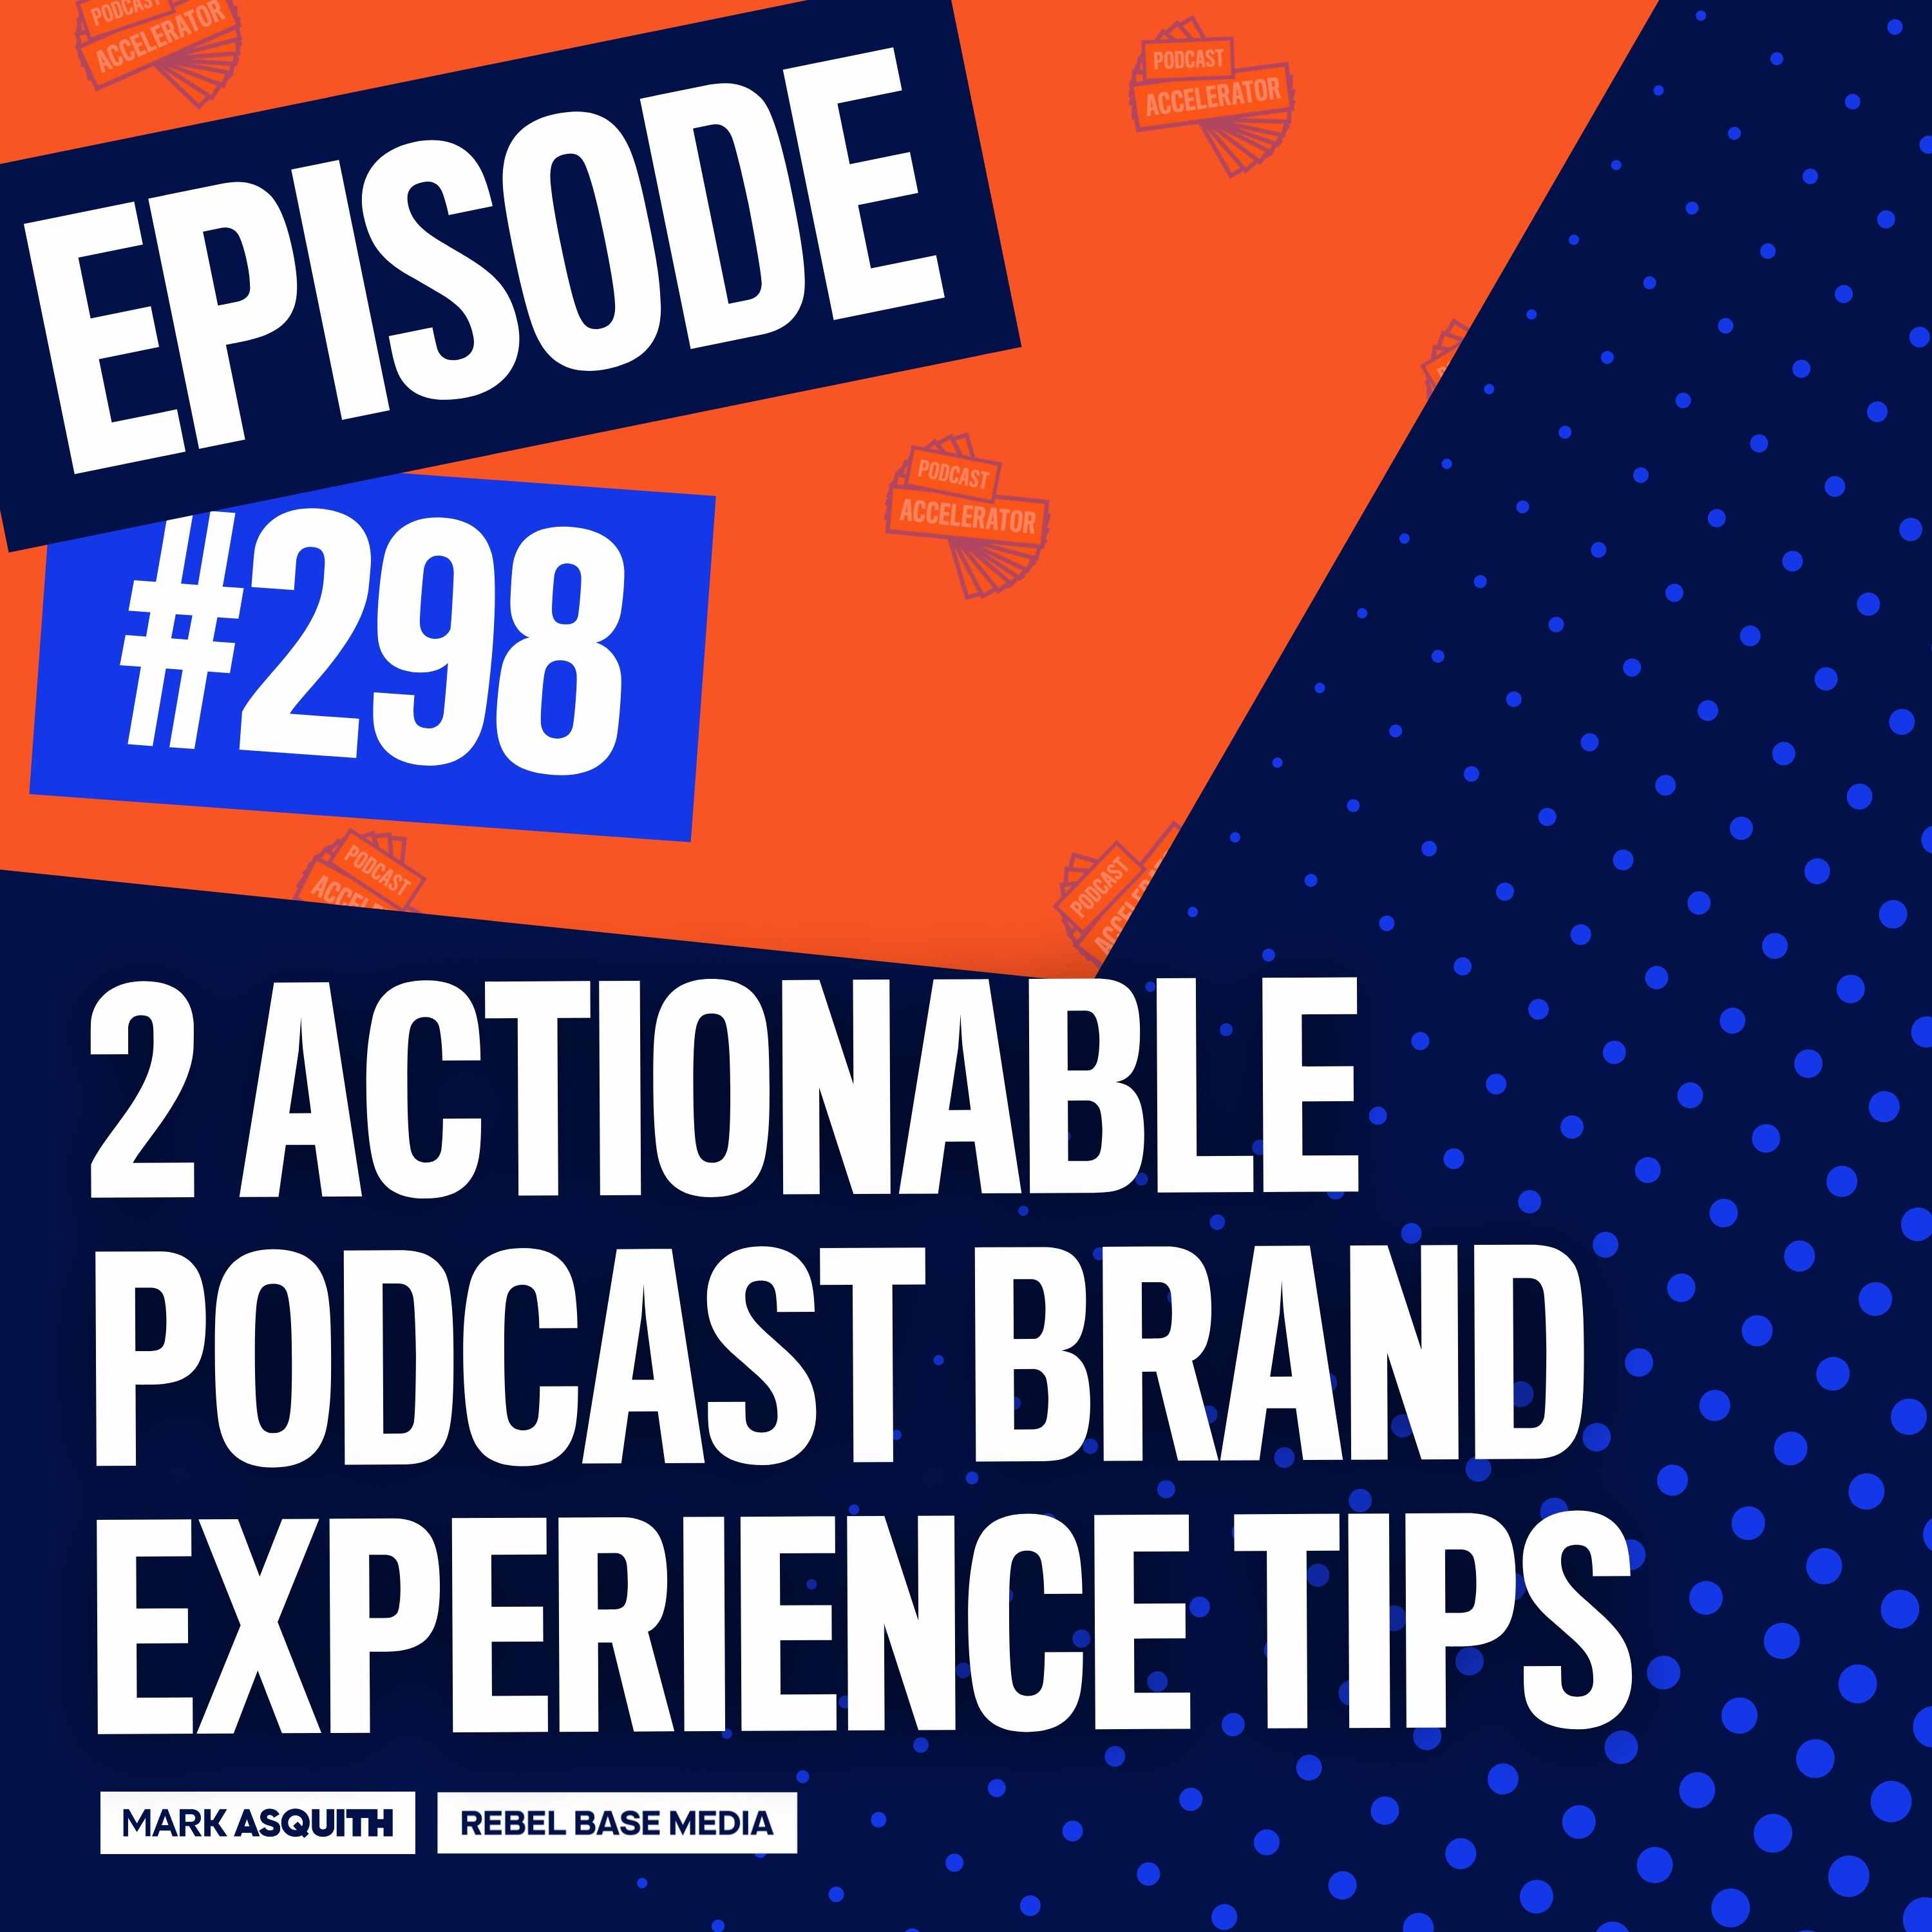 Artwork for podcast The Podcast Accelerator, Learn How to Grow Your Podcast